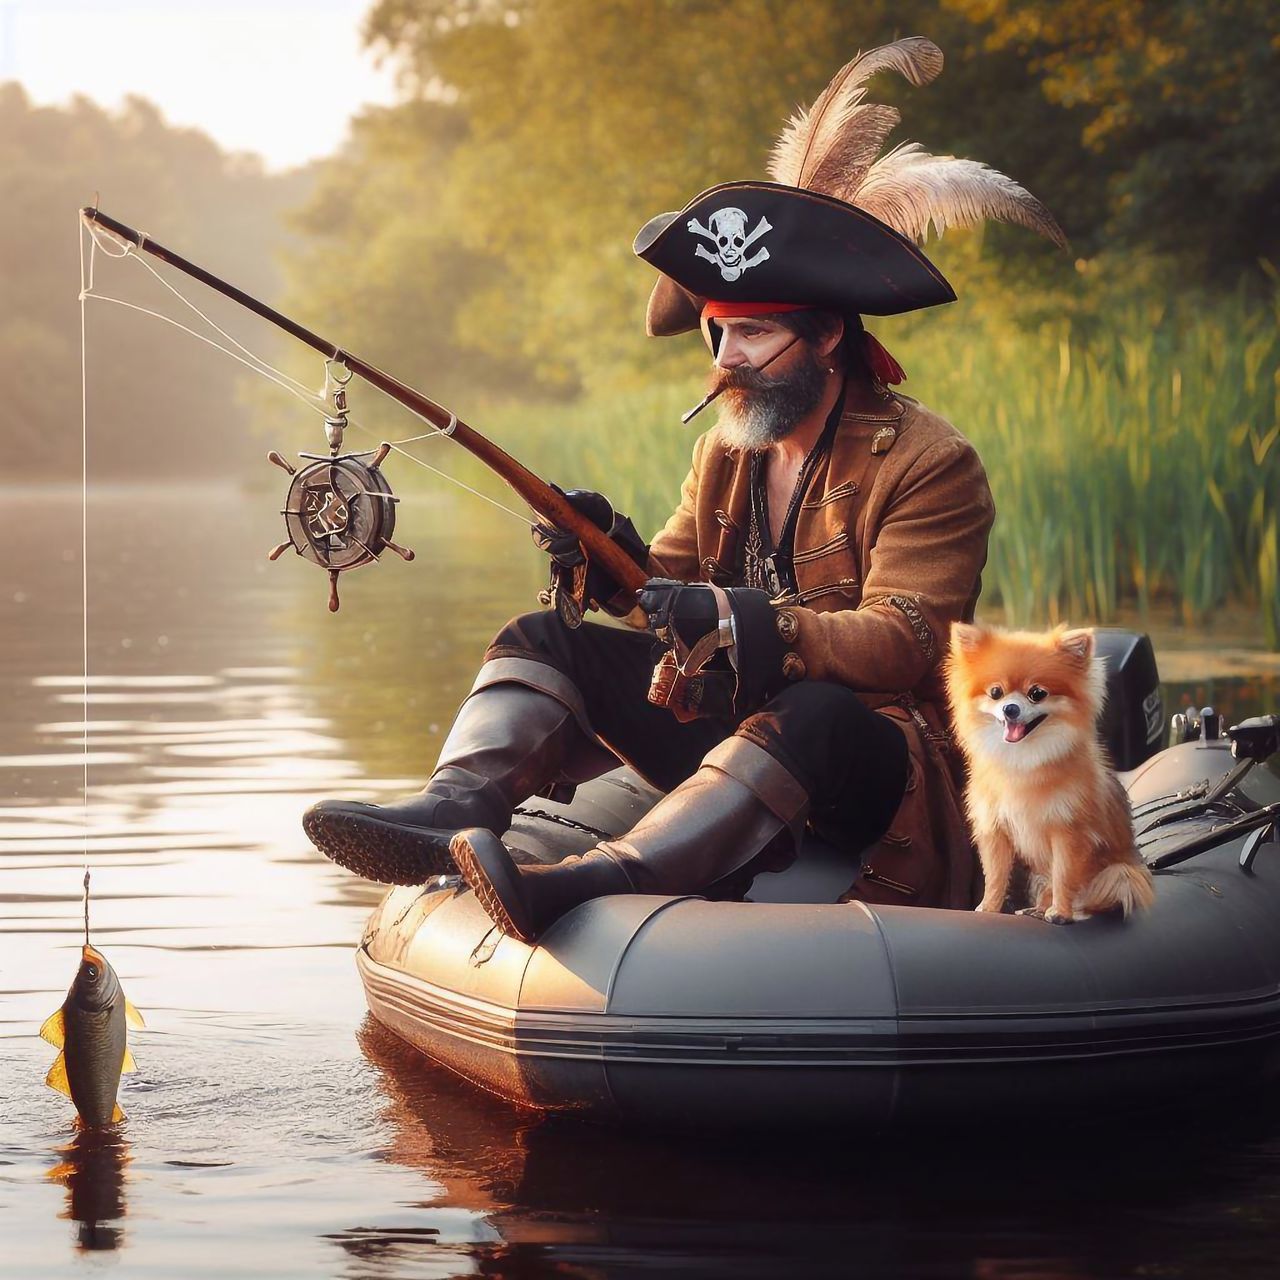 dog, animal, water, animal themes, carnivore, one animal, mammal, domestic animals, pet, canine, nautical vessel, nature, adult, transportation, men, hat, clothing, sitting, animal wildlife, lake, mode of transportation, person, women, vehicle, fishing, fun, boat, female, holiday, activity, outdoors, emotion, trip, one person, vacation, travel, autumn, retriever